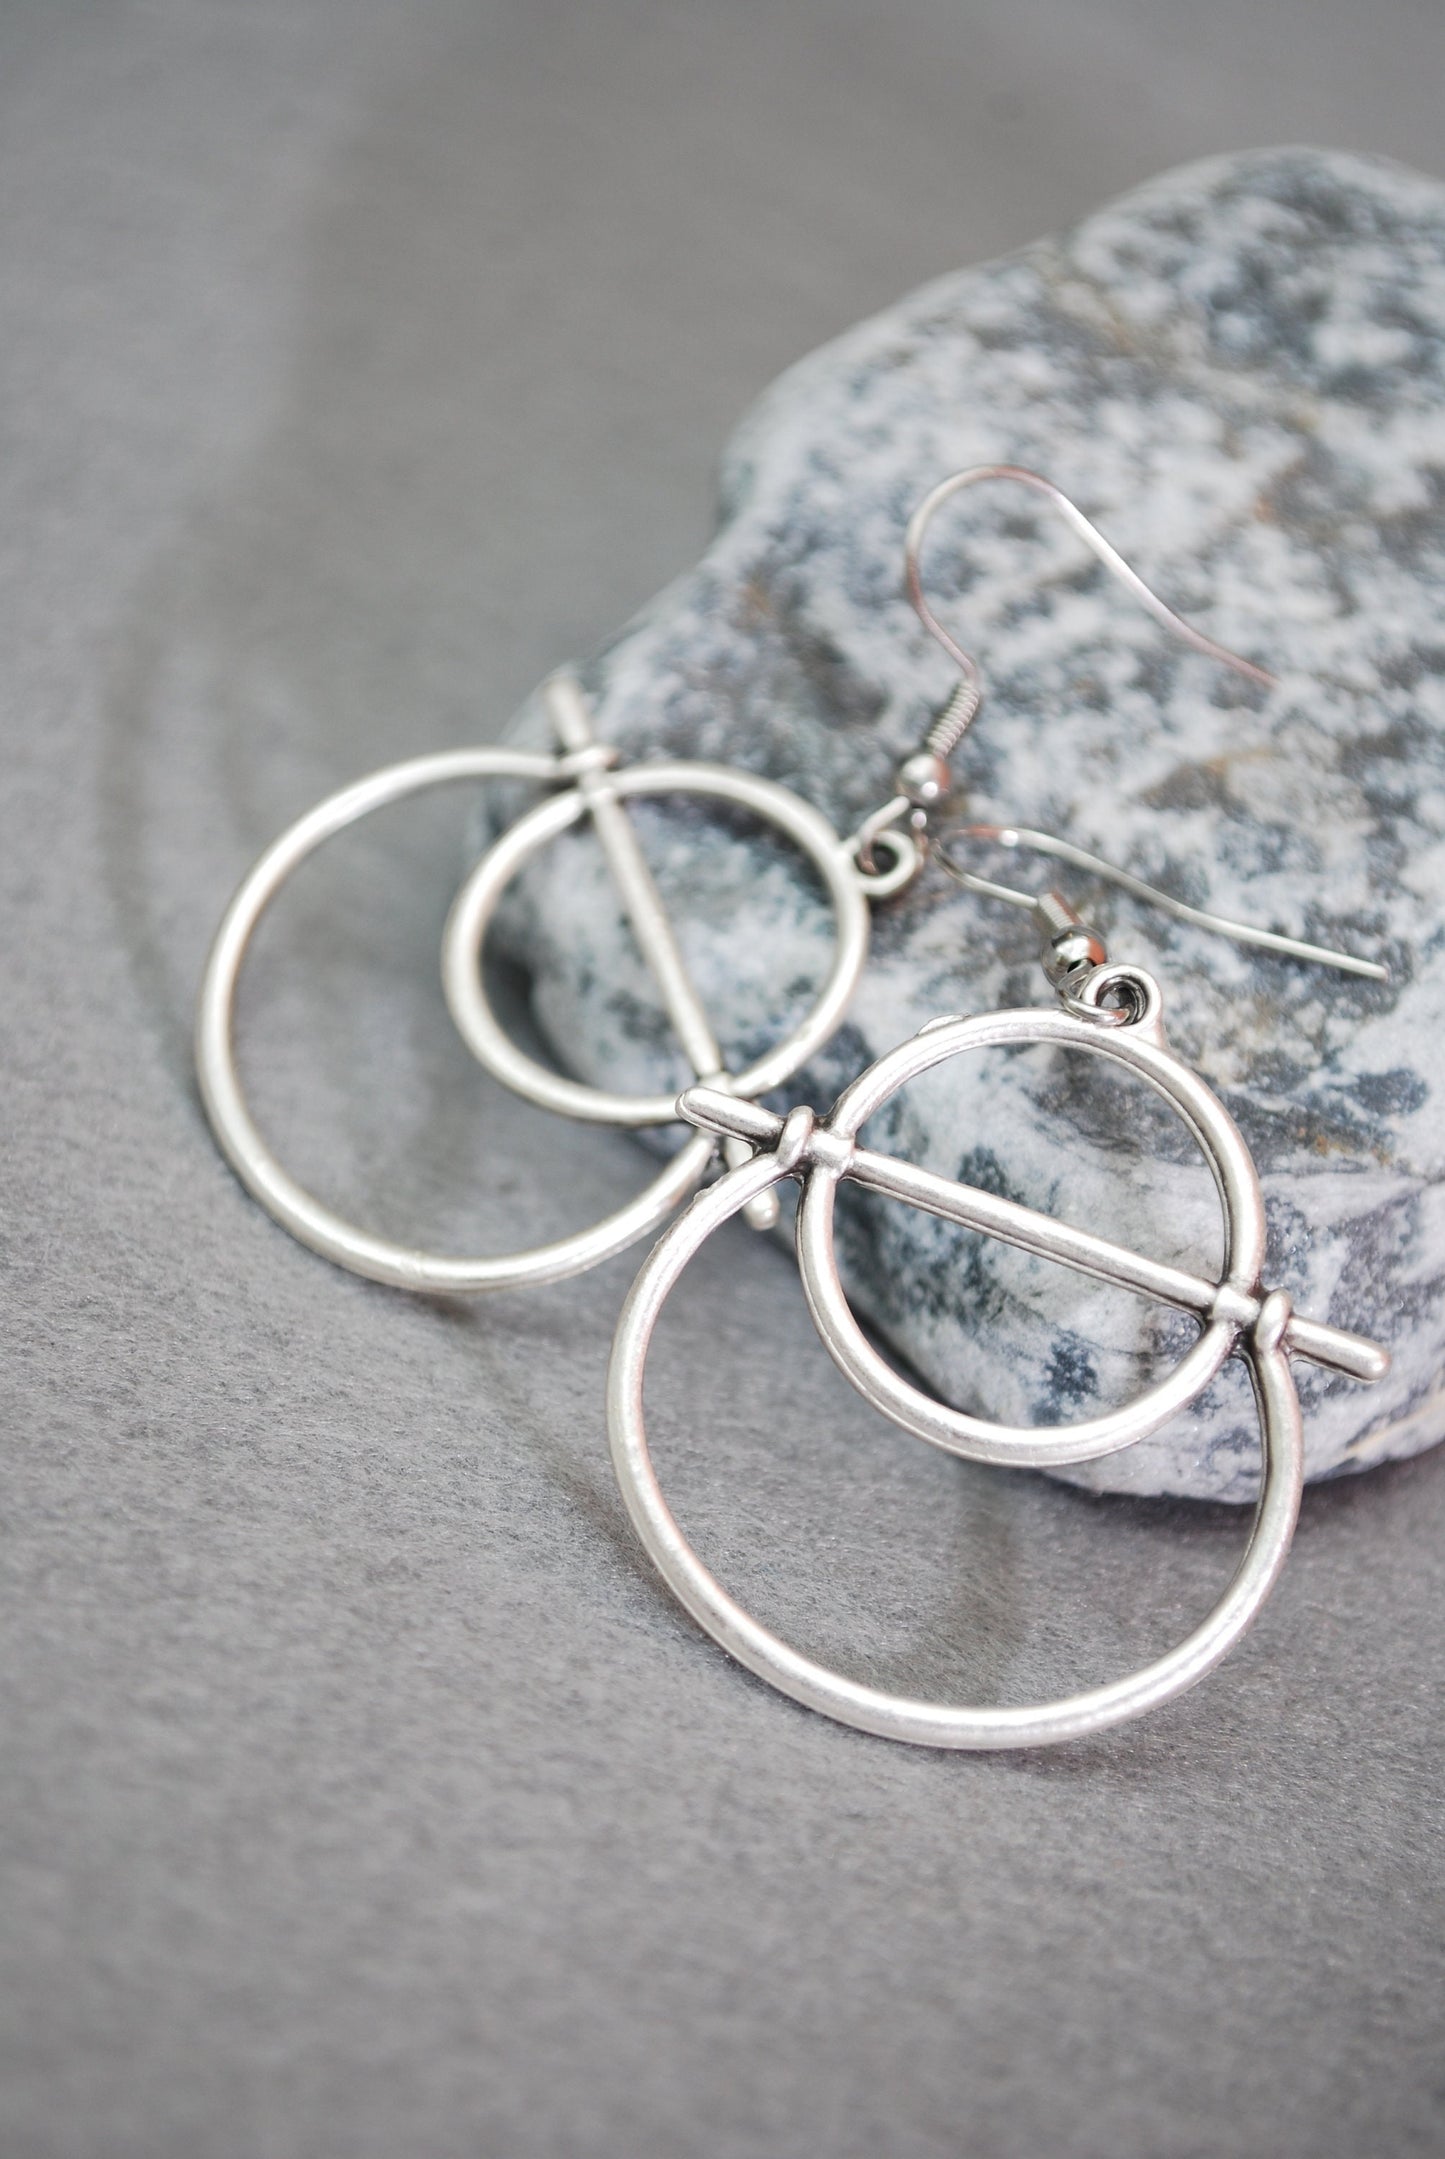 Abstract shape earrings, Silver plated geometric earrings, boho outfit, summer lightweight  5cm - 2"